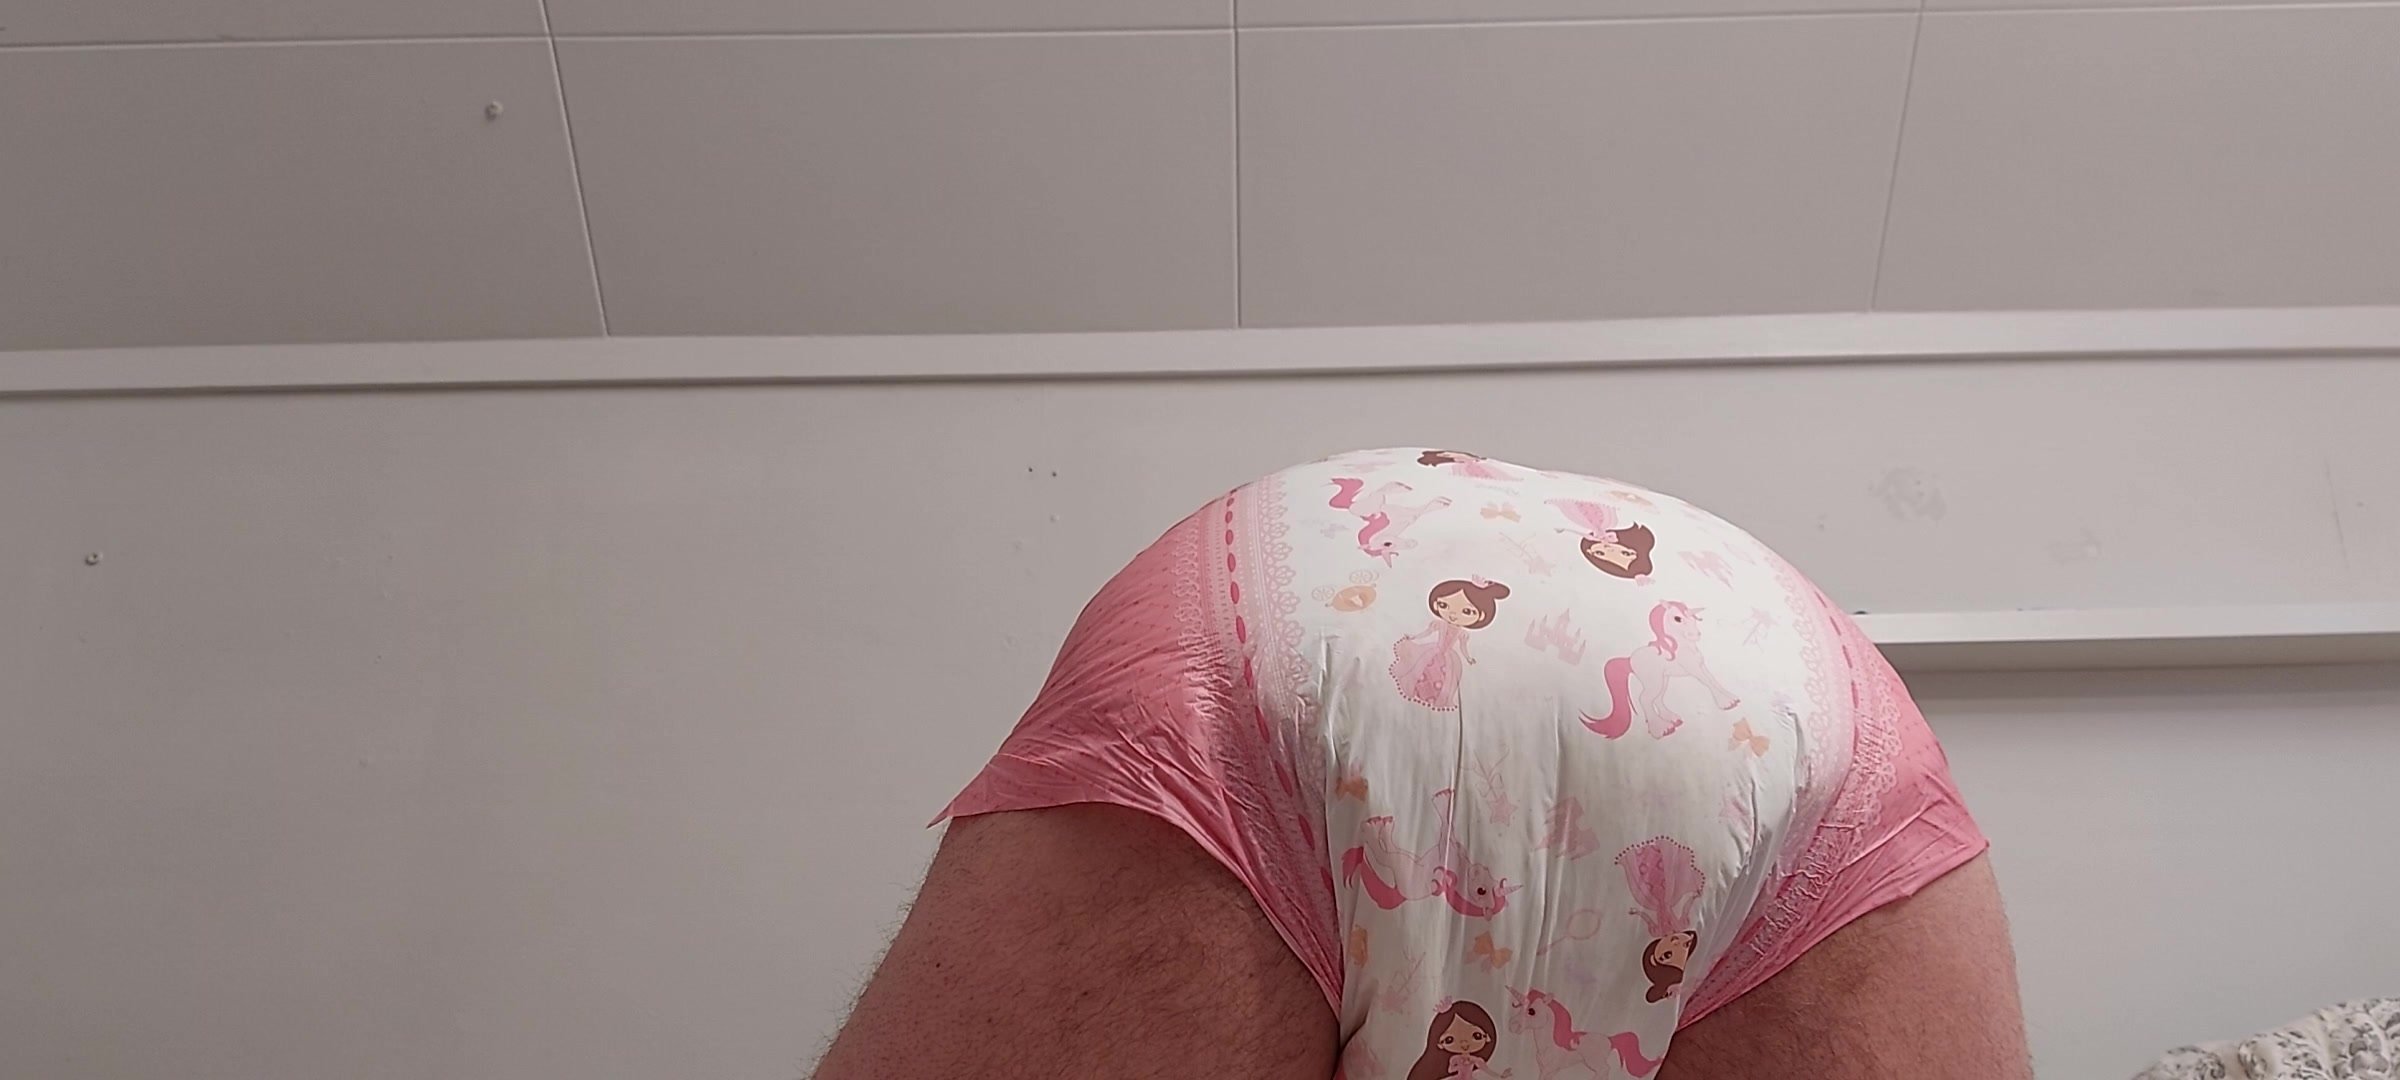 Small mess in Princess diapers